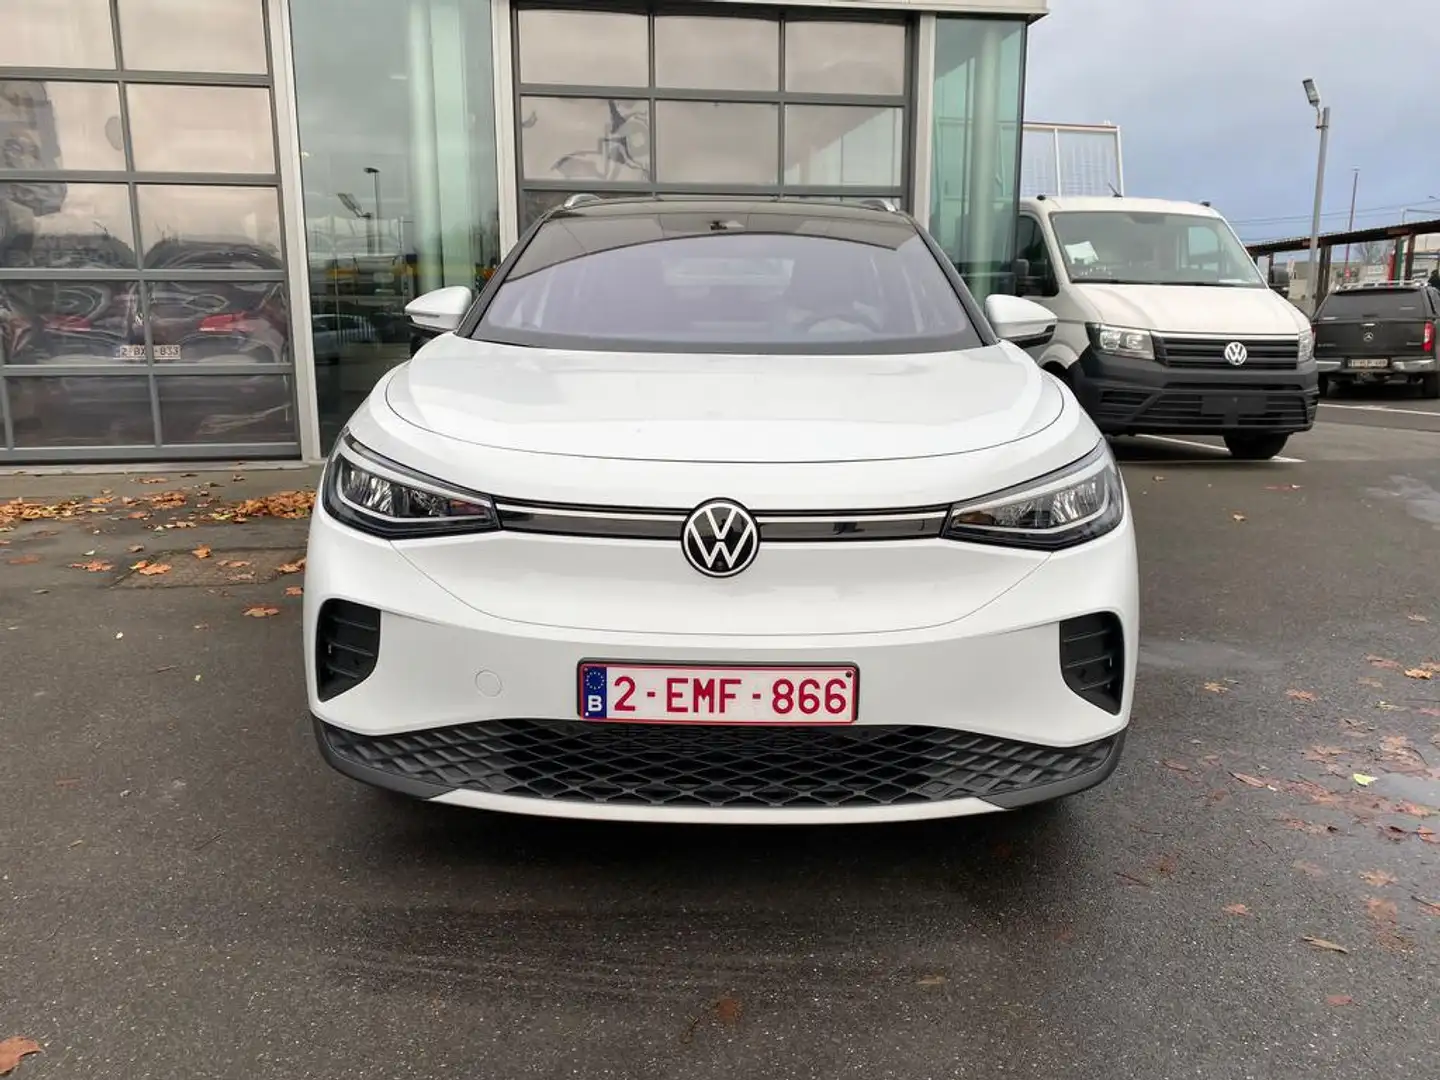 Volkswagen ID.4 Pro Performance 150 kW (204 PS) - 77 kWh, 1-speed  Wit - 2